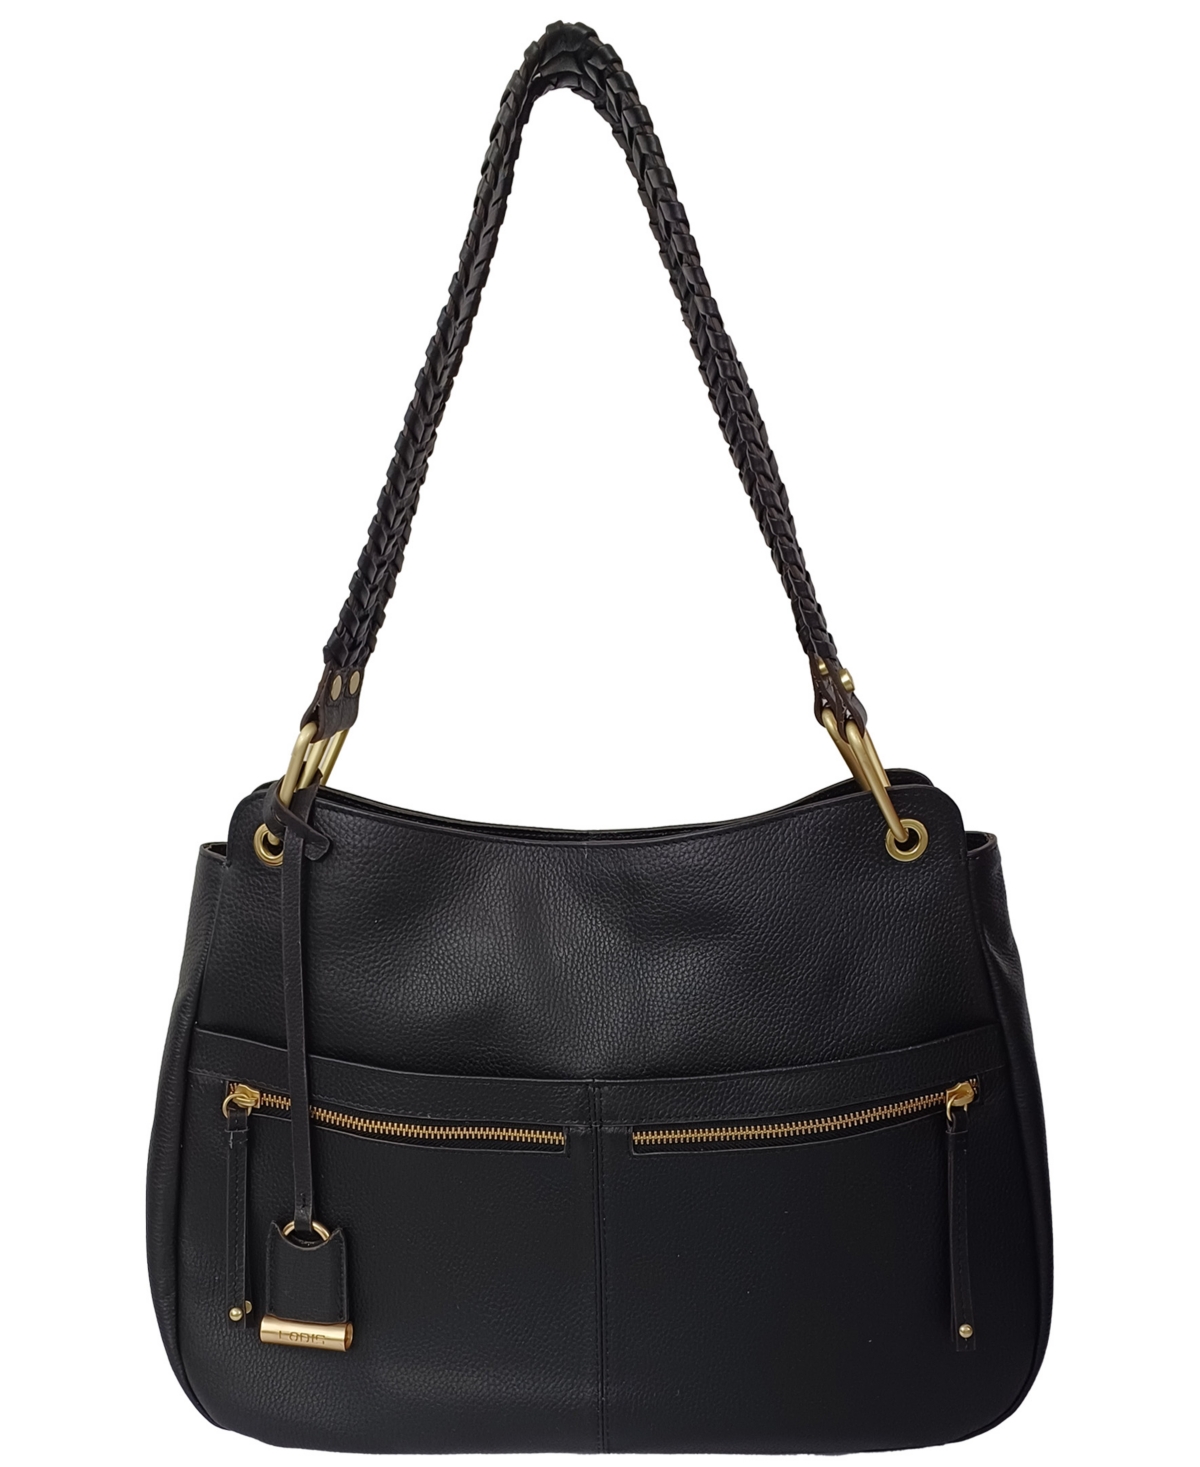 Lodis St Barts Leather Tote In Black